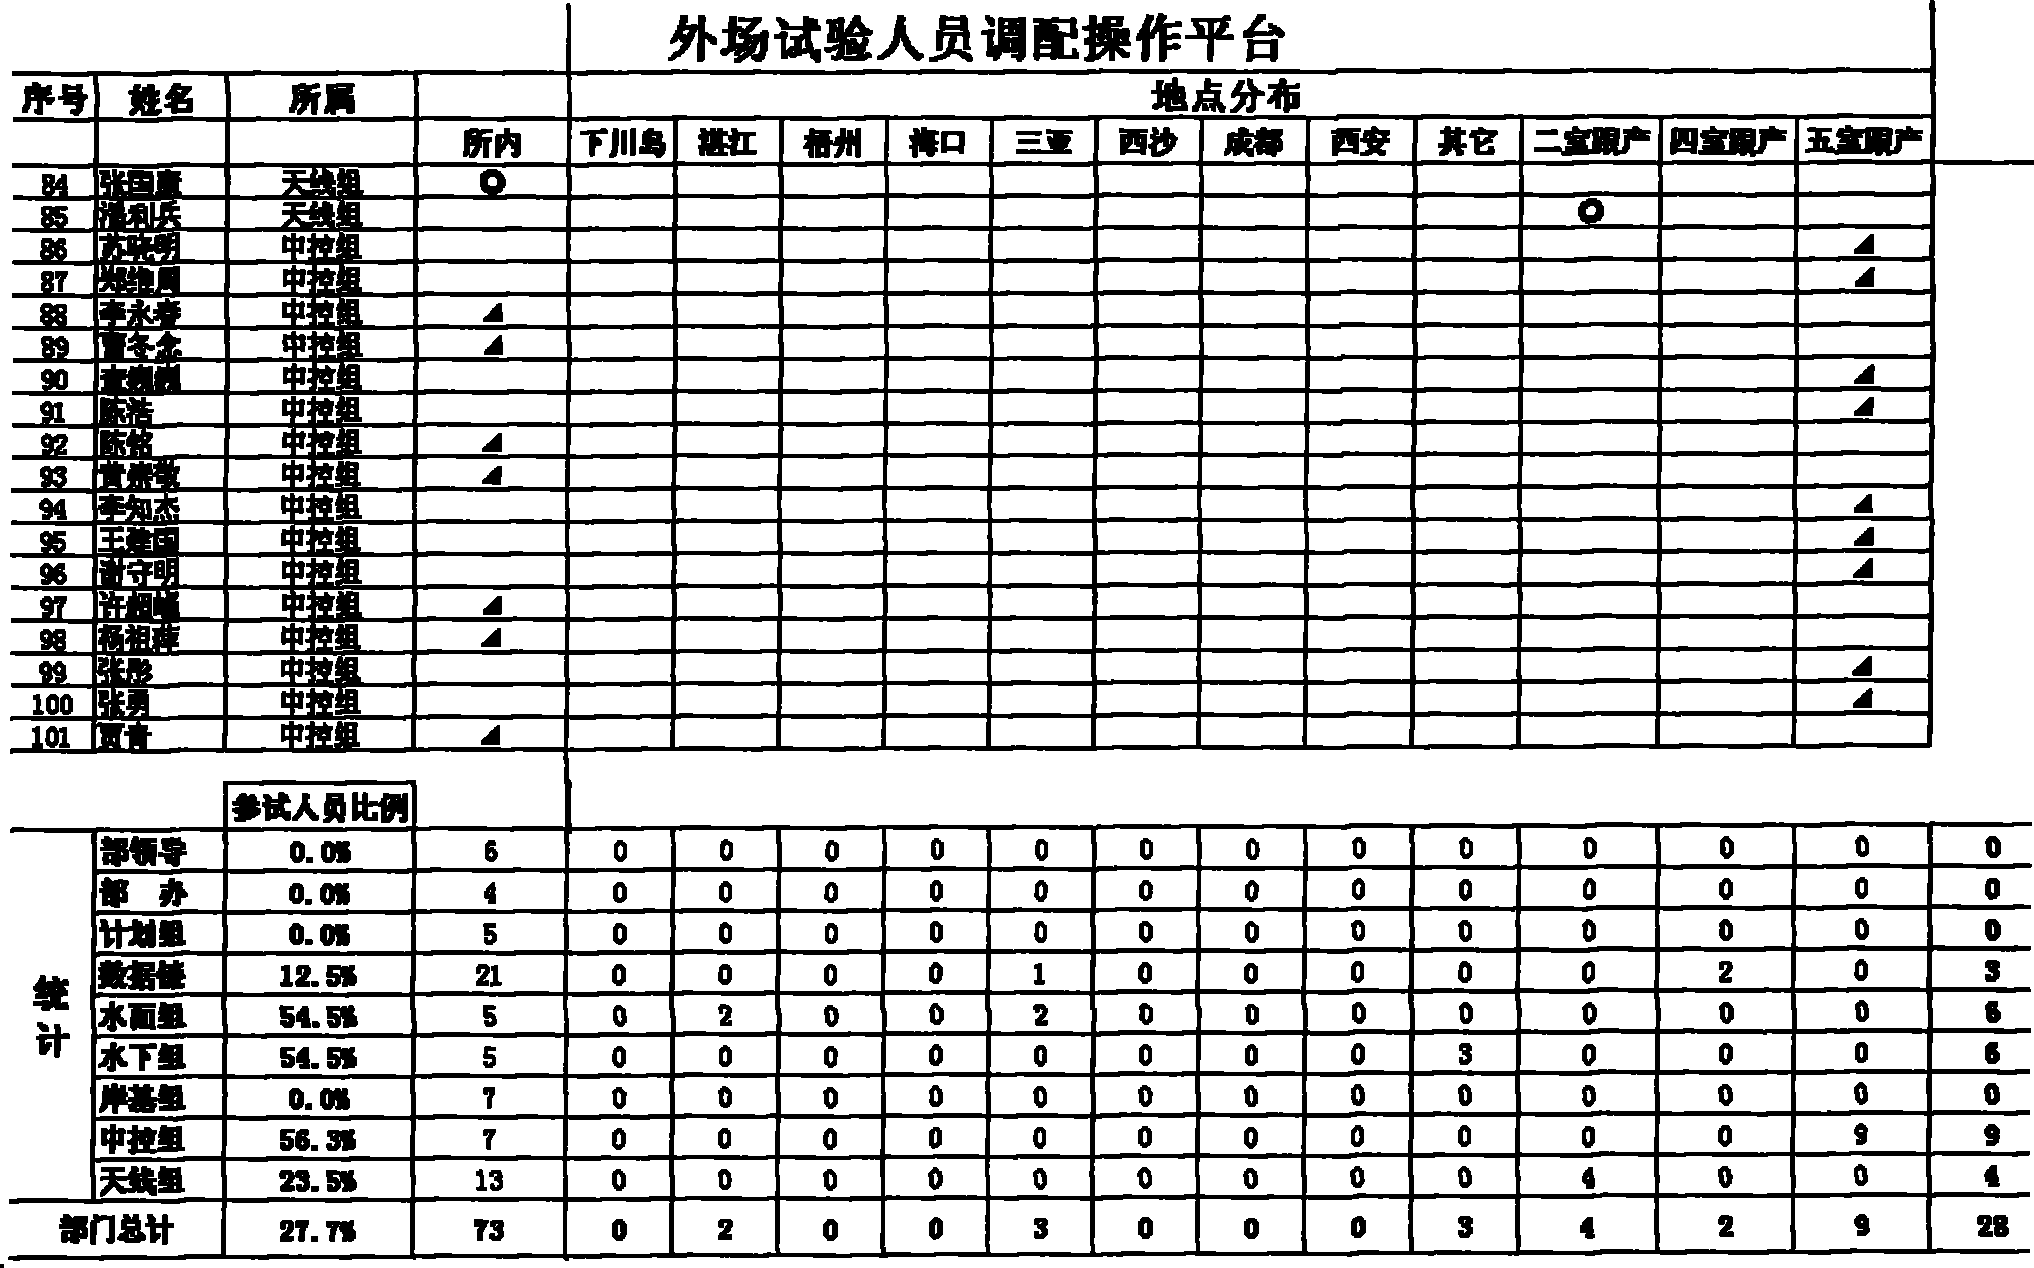 Personnel distribution allotment system